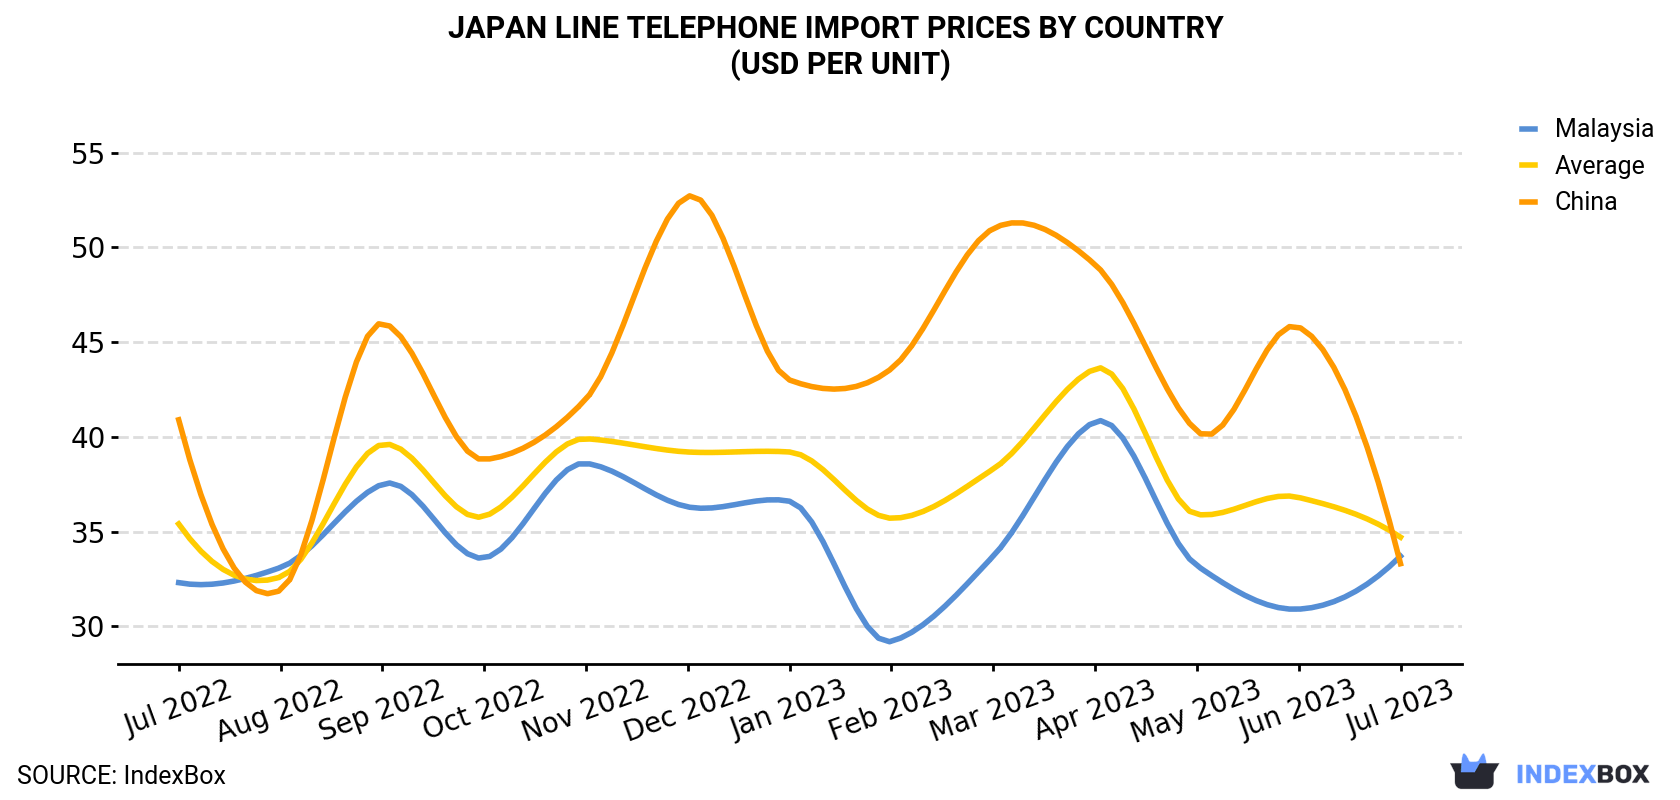 Japan Line Telephone Import Prices By Country (USD Per Unit)